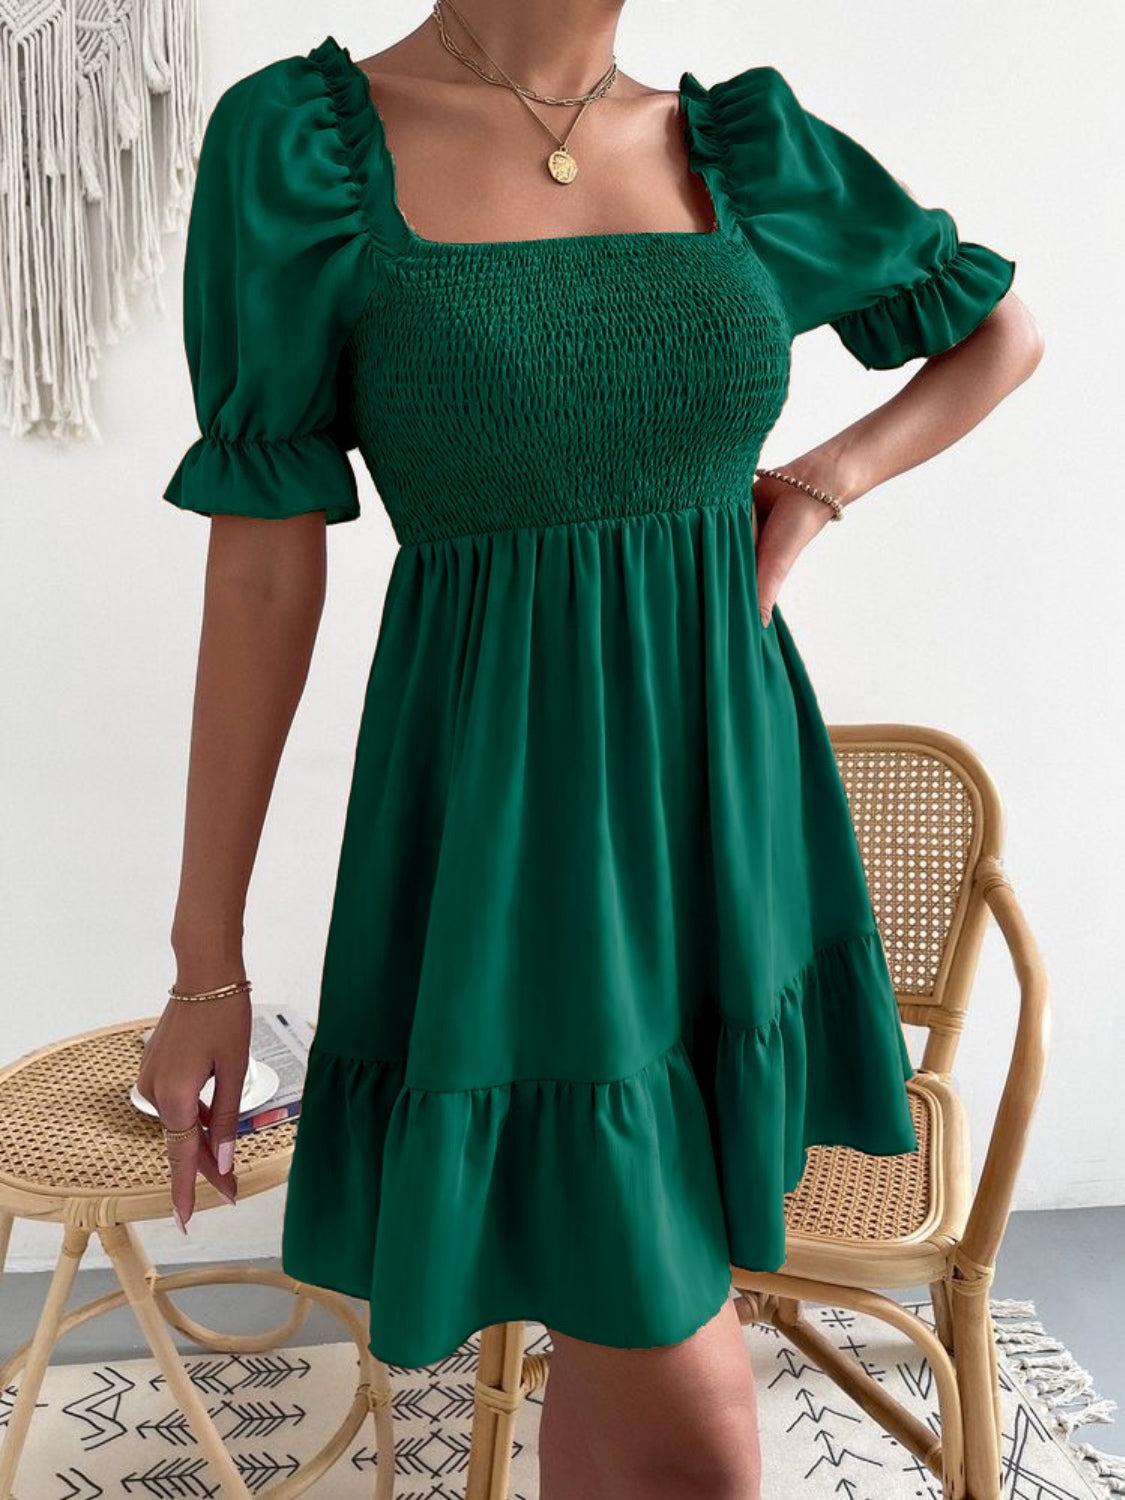 a woman in a green dress standing next to a chair